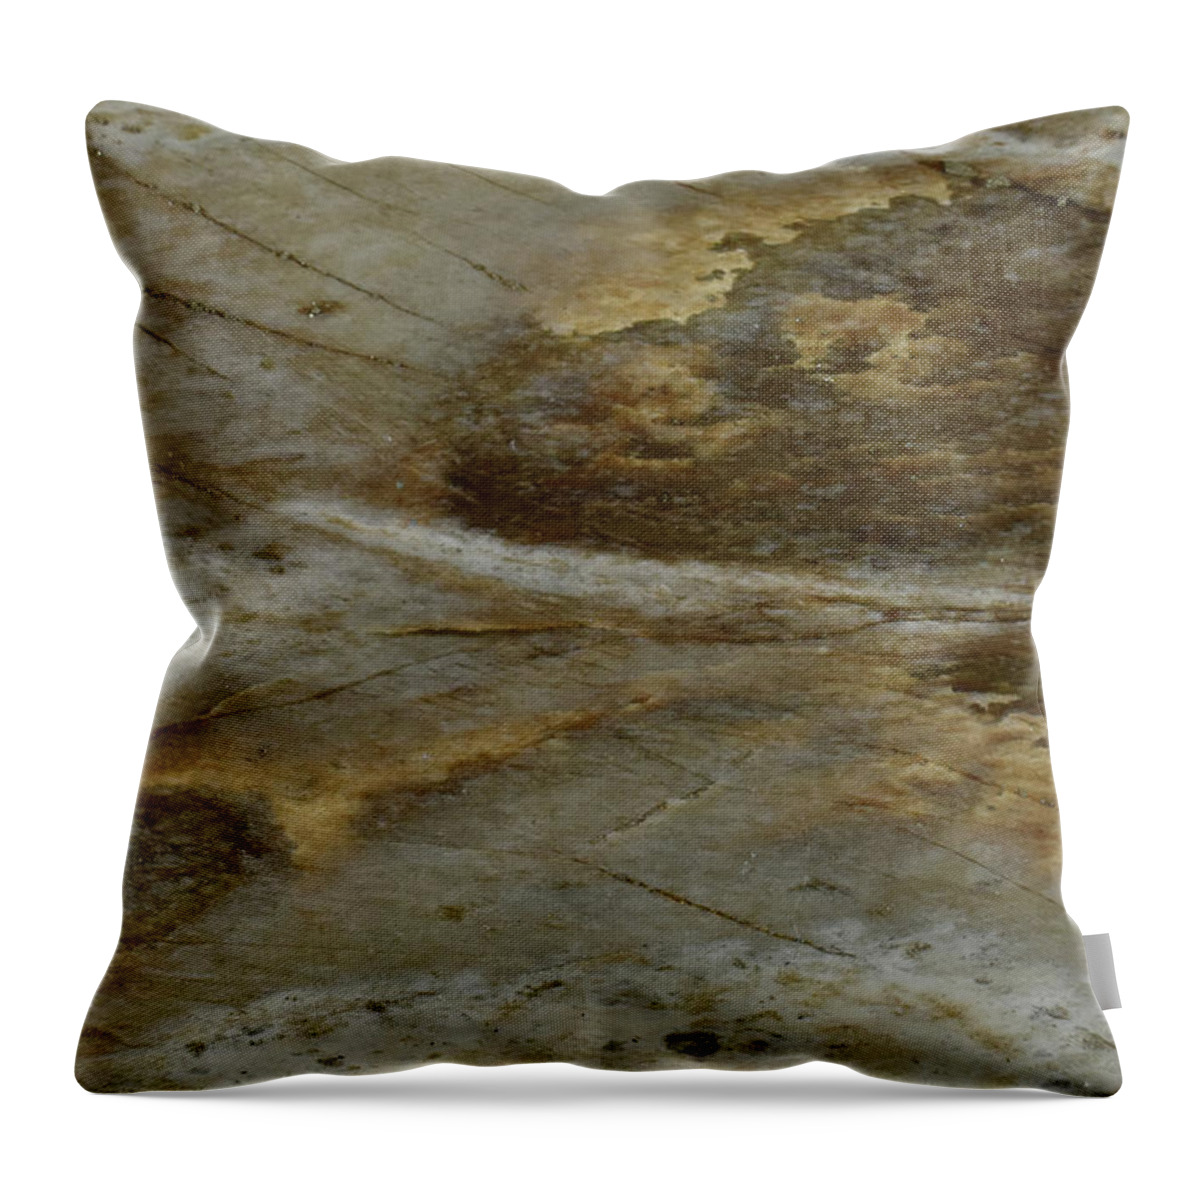 Art In A Rock Throw Pillow featuring the photograph Mr1012d by Art in a Rock